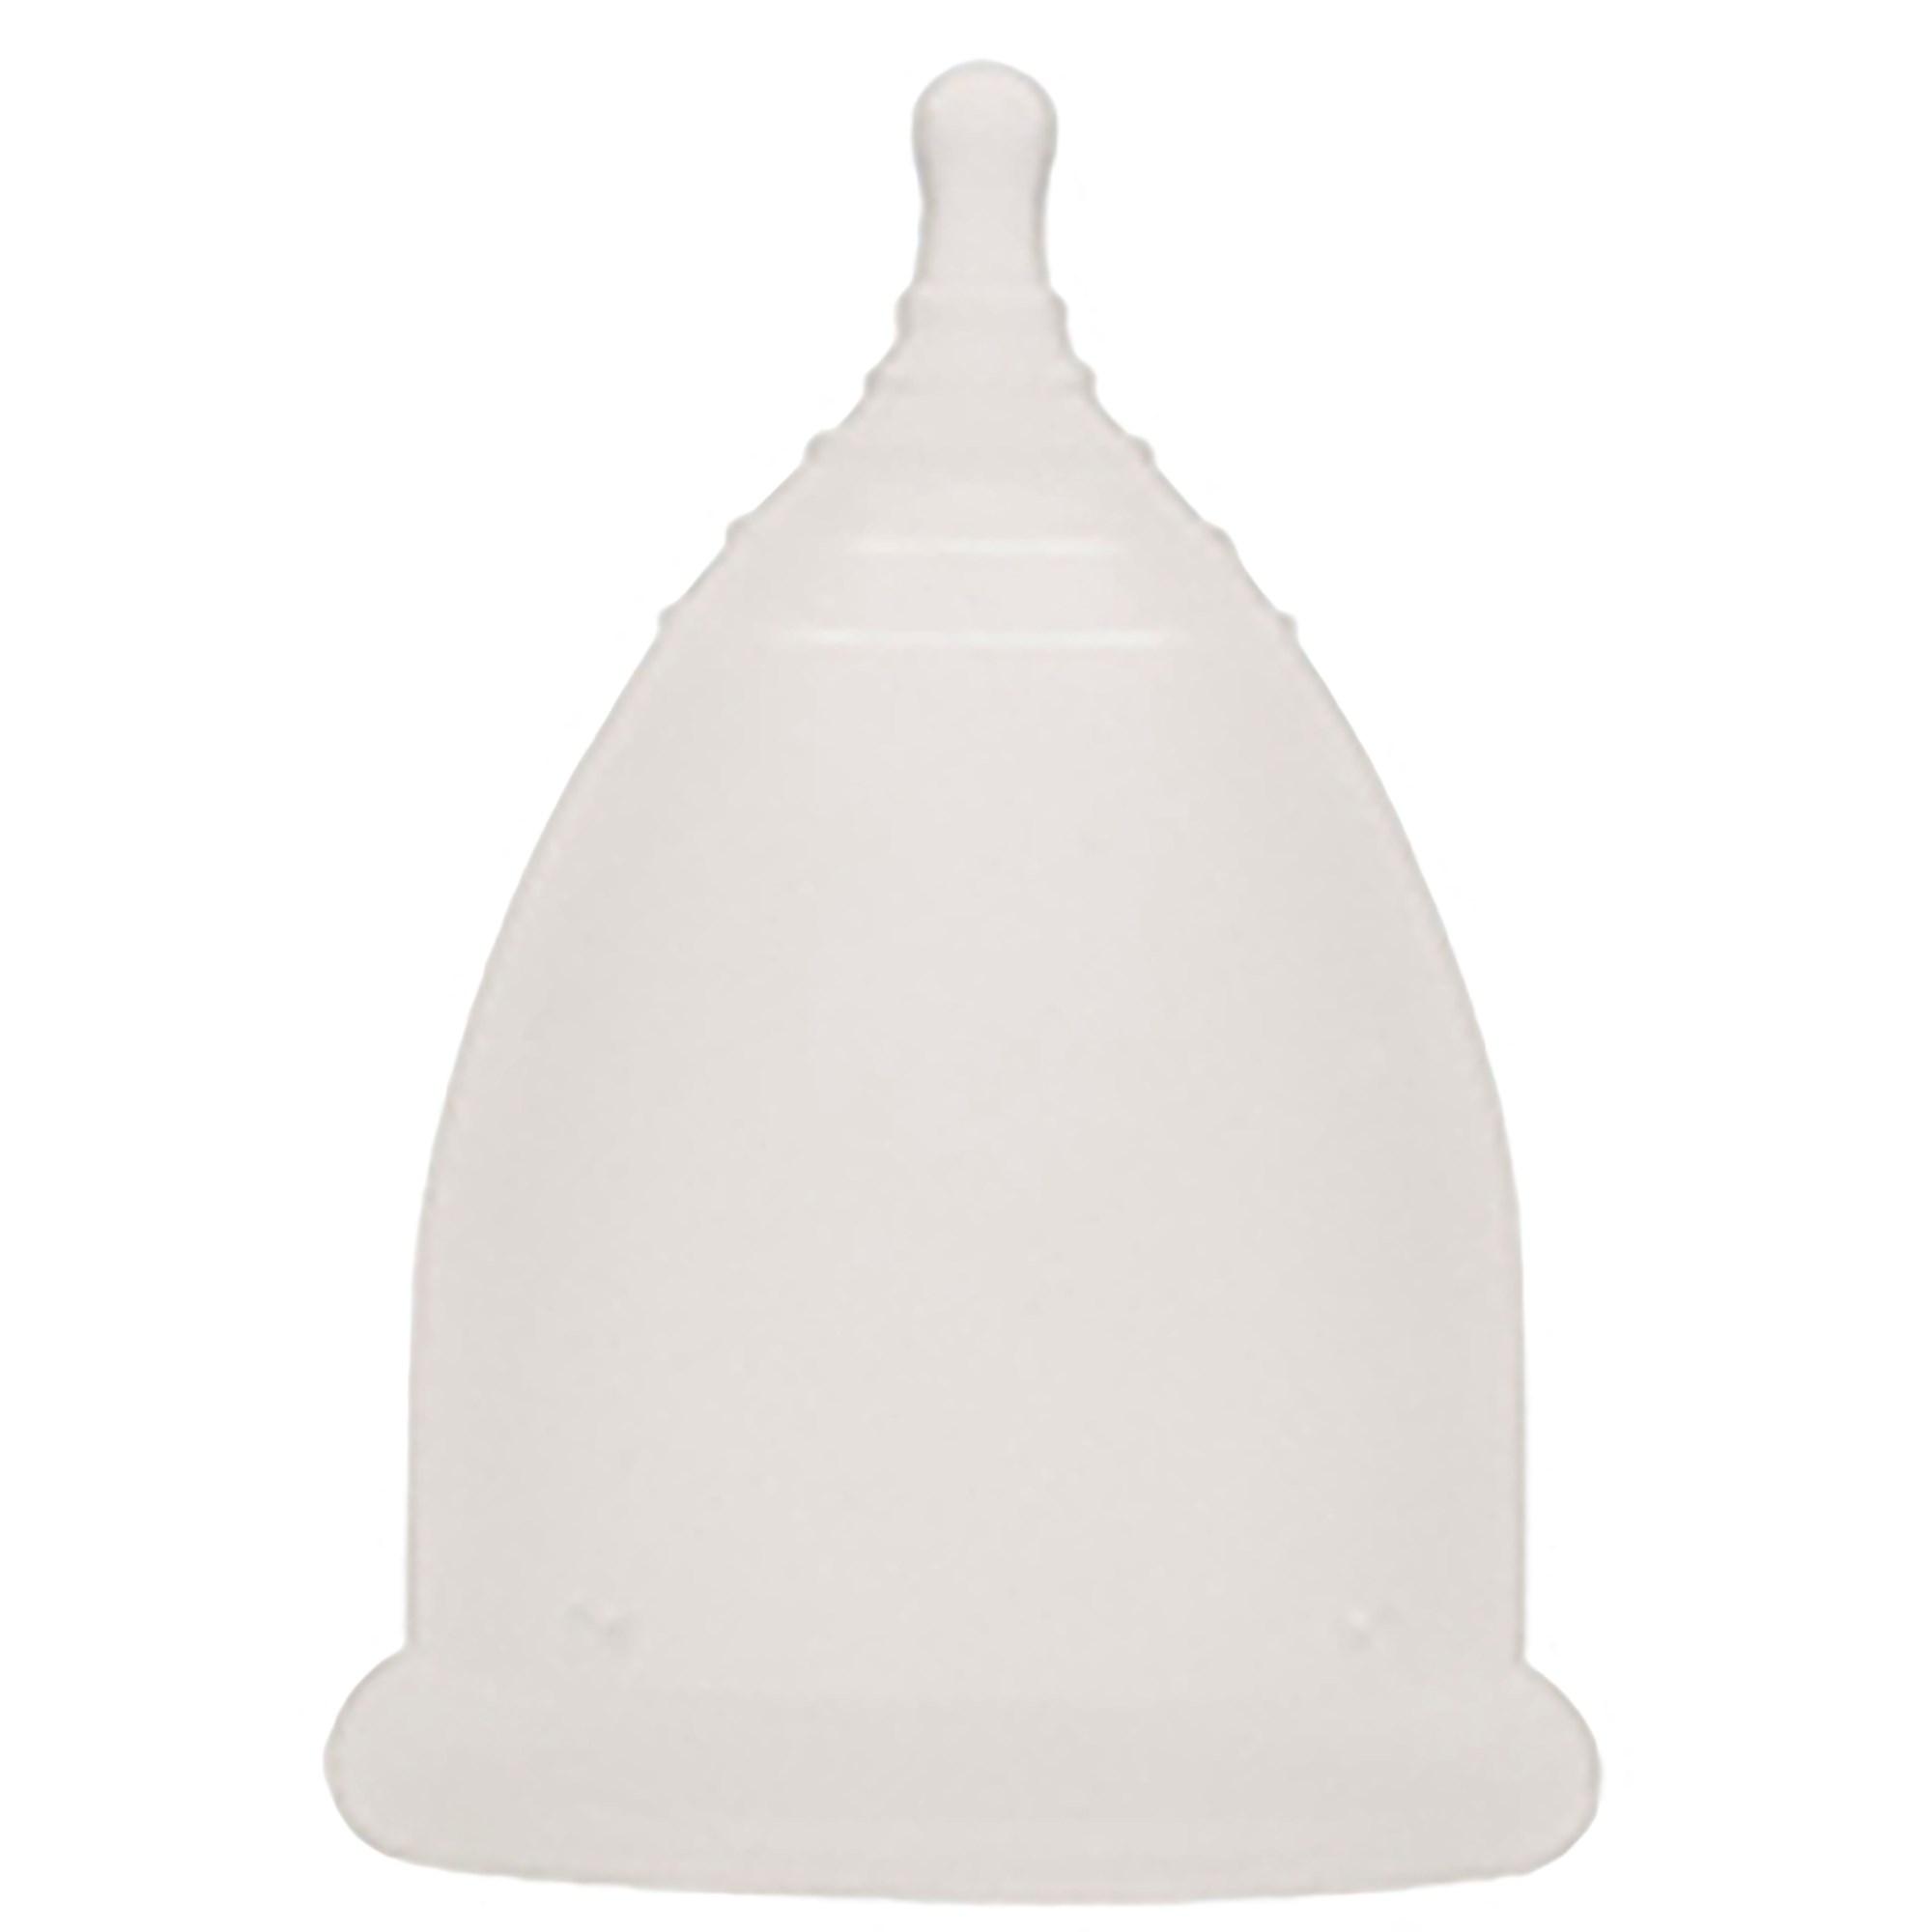 Imse Menstrual Cup Small